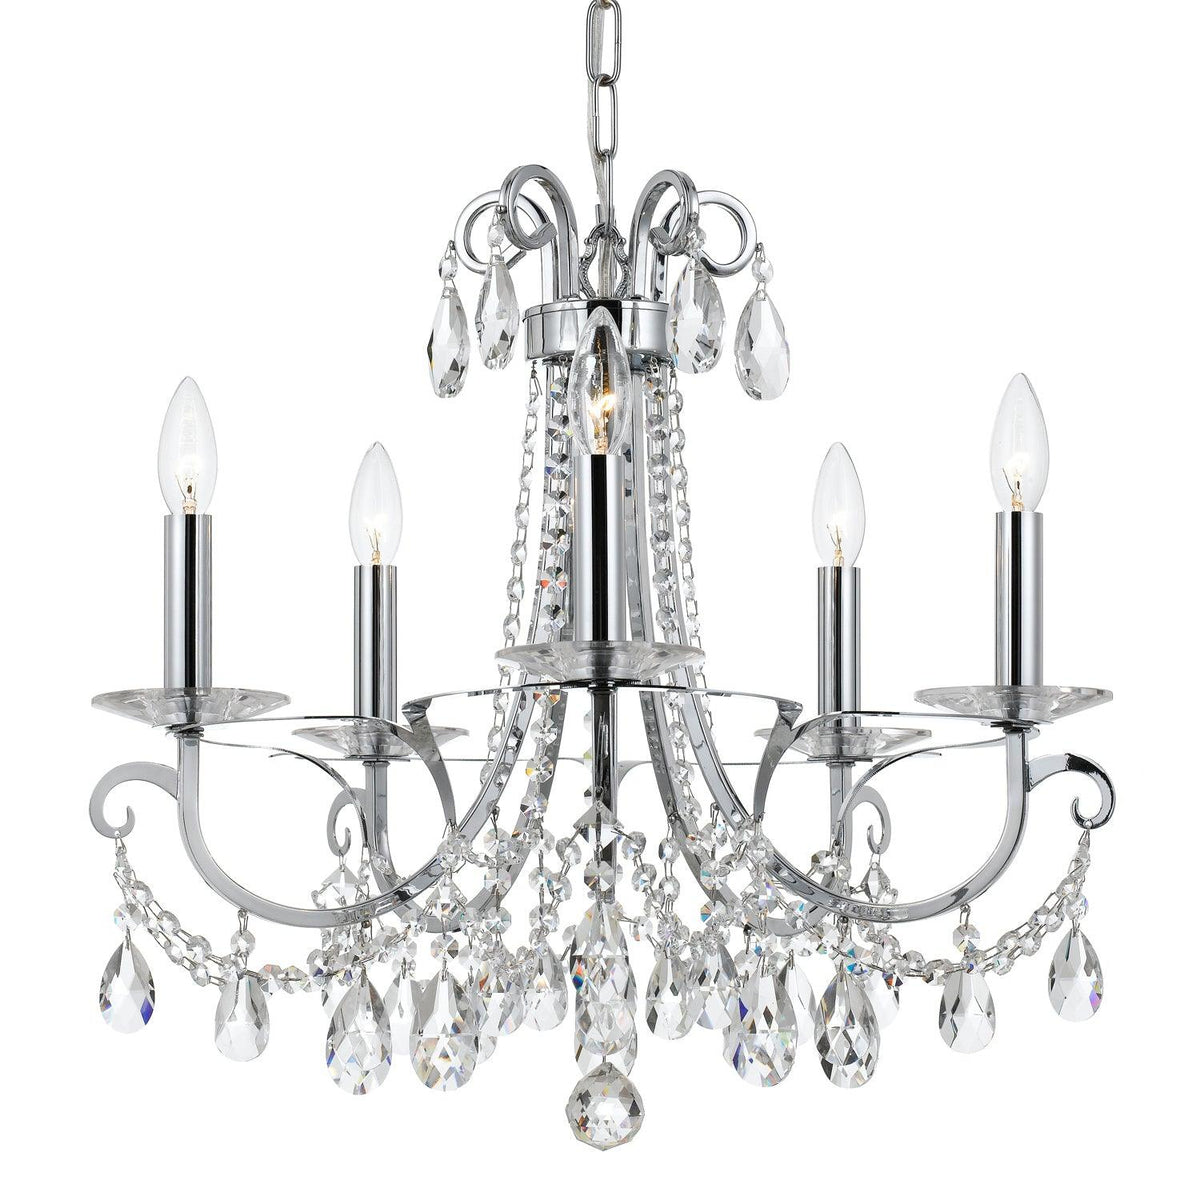 Crystorama - Othello Chandelier - 6825-CH-CL-MWP | Montreal Lighting & Hardware